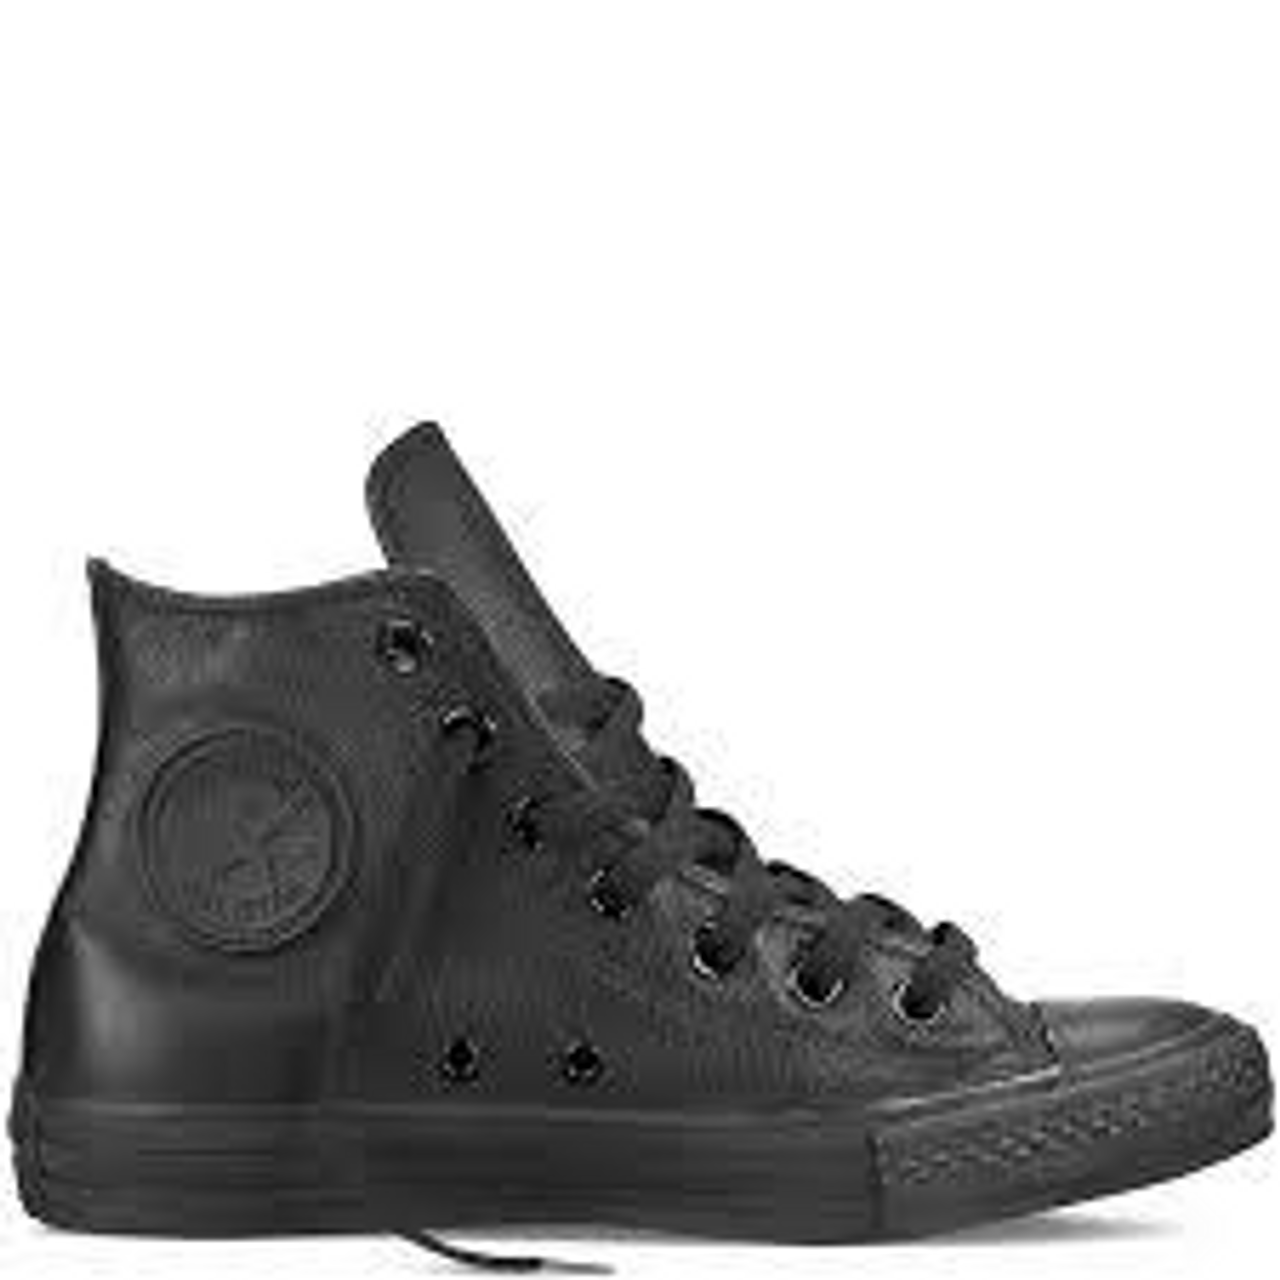 CONVERSE 135251C HI LEATHER BLACK - Boots n All